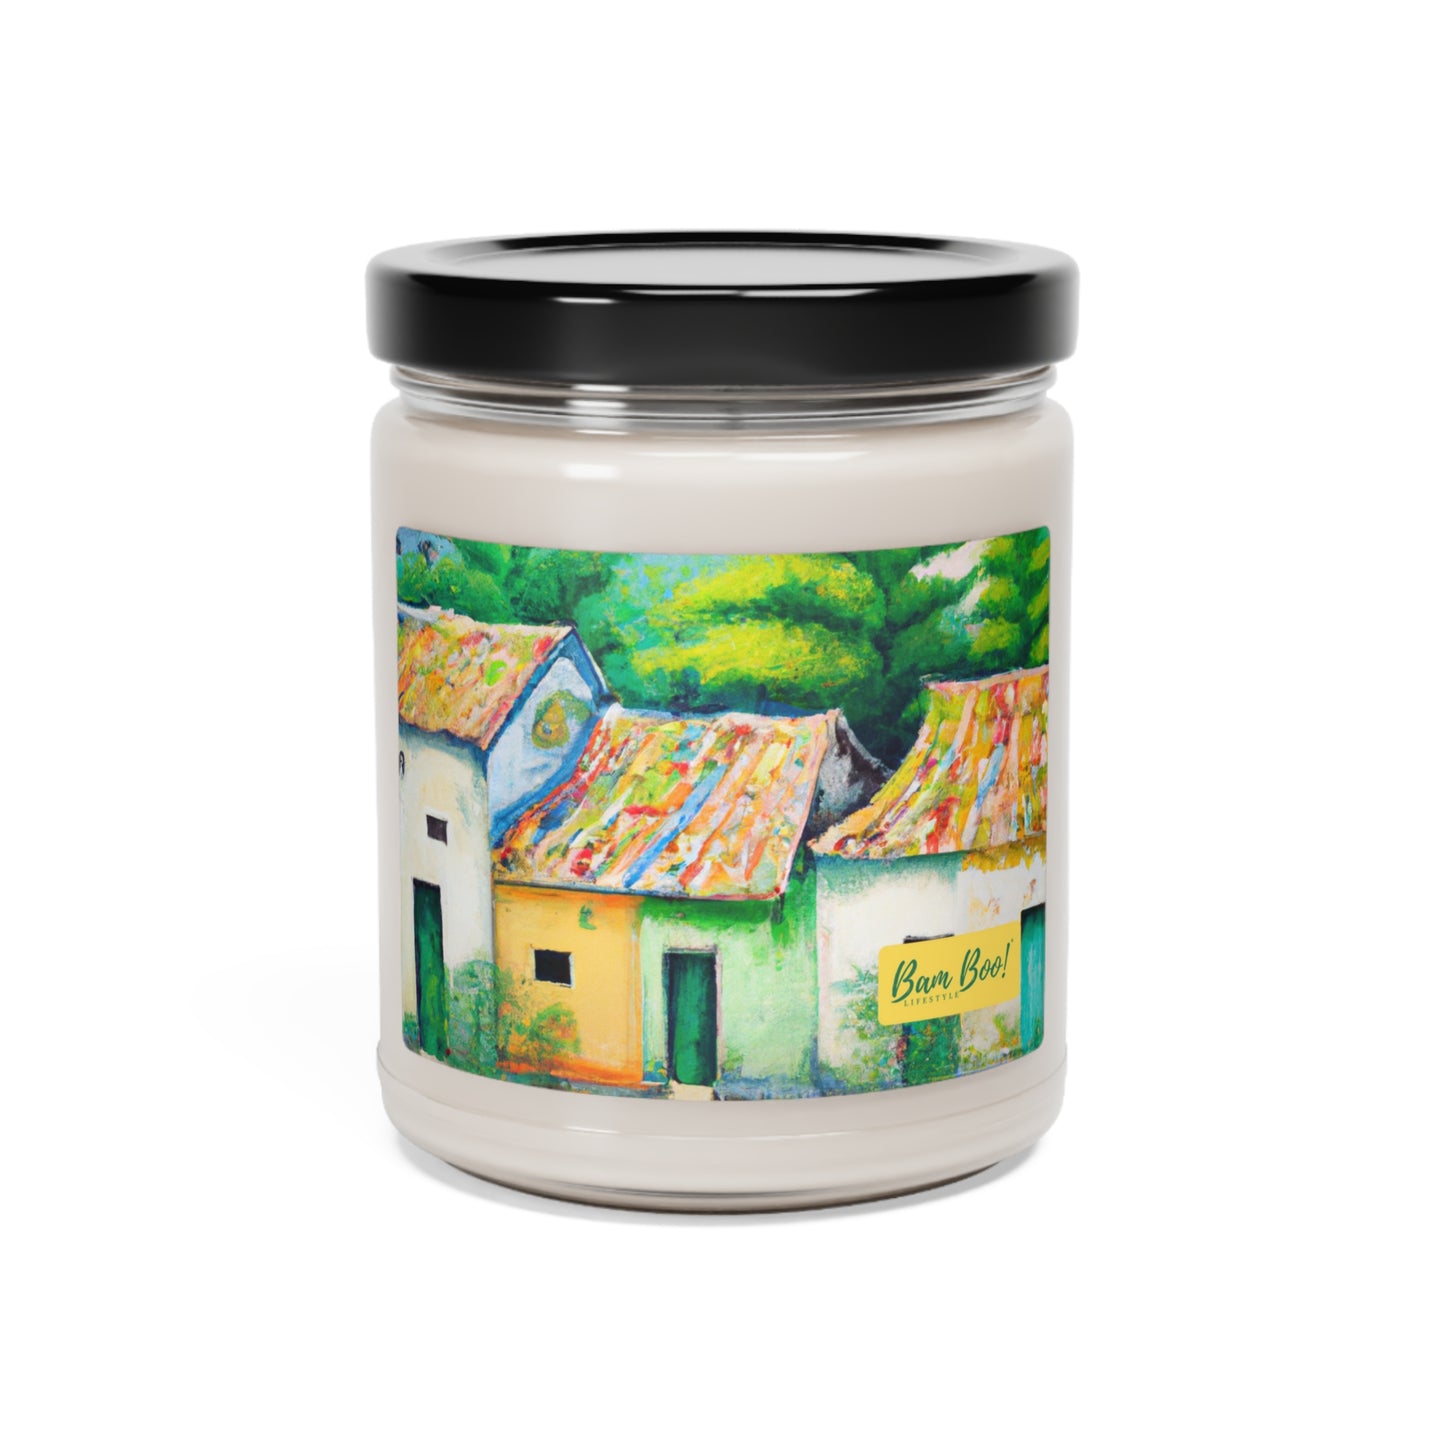 "A Feast For the Eyes: Capturing the Beauty of Nature in Oil." - Bam Boo! Lifestyle Eco-friendly Soy Candle